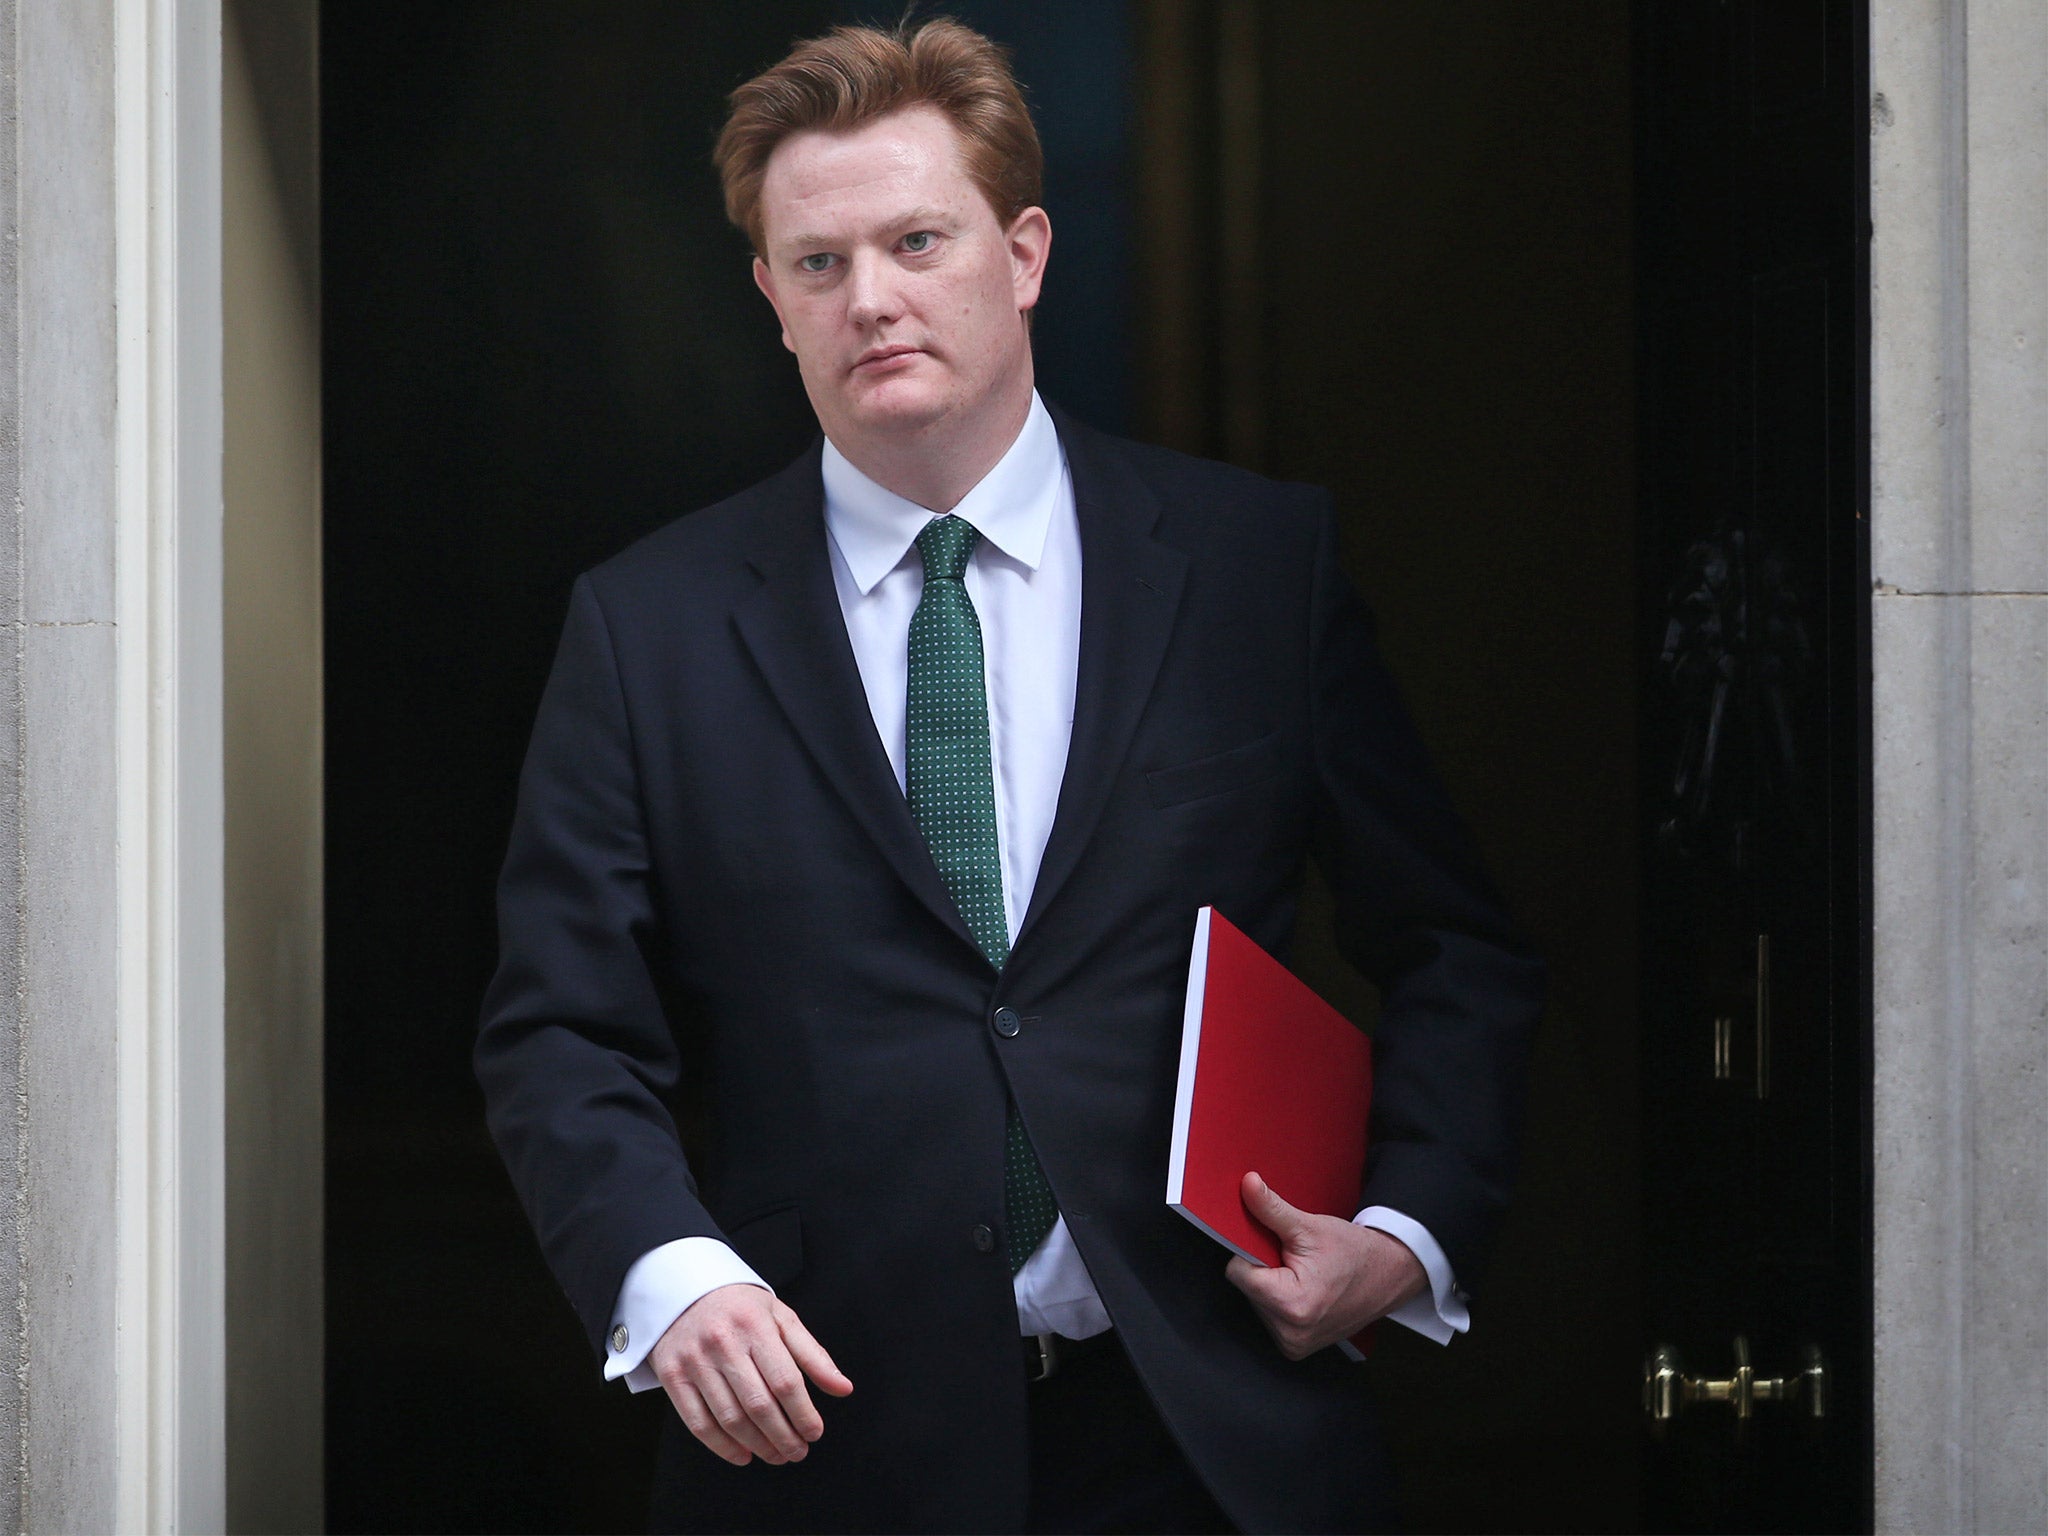 Danny Alexander will declare the Lib Dems’ own plans for 2015-20 on Thursday